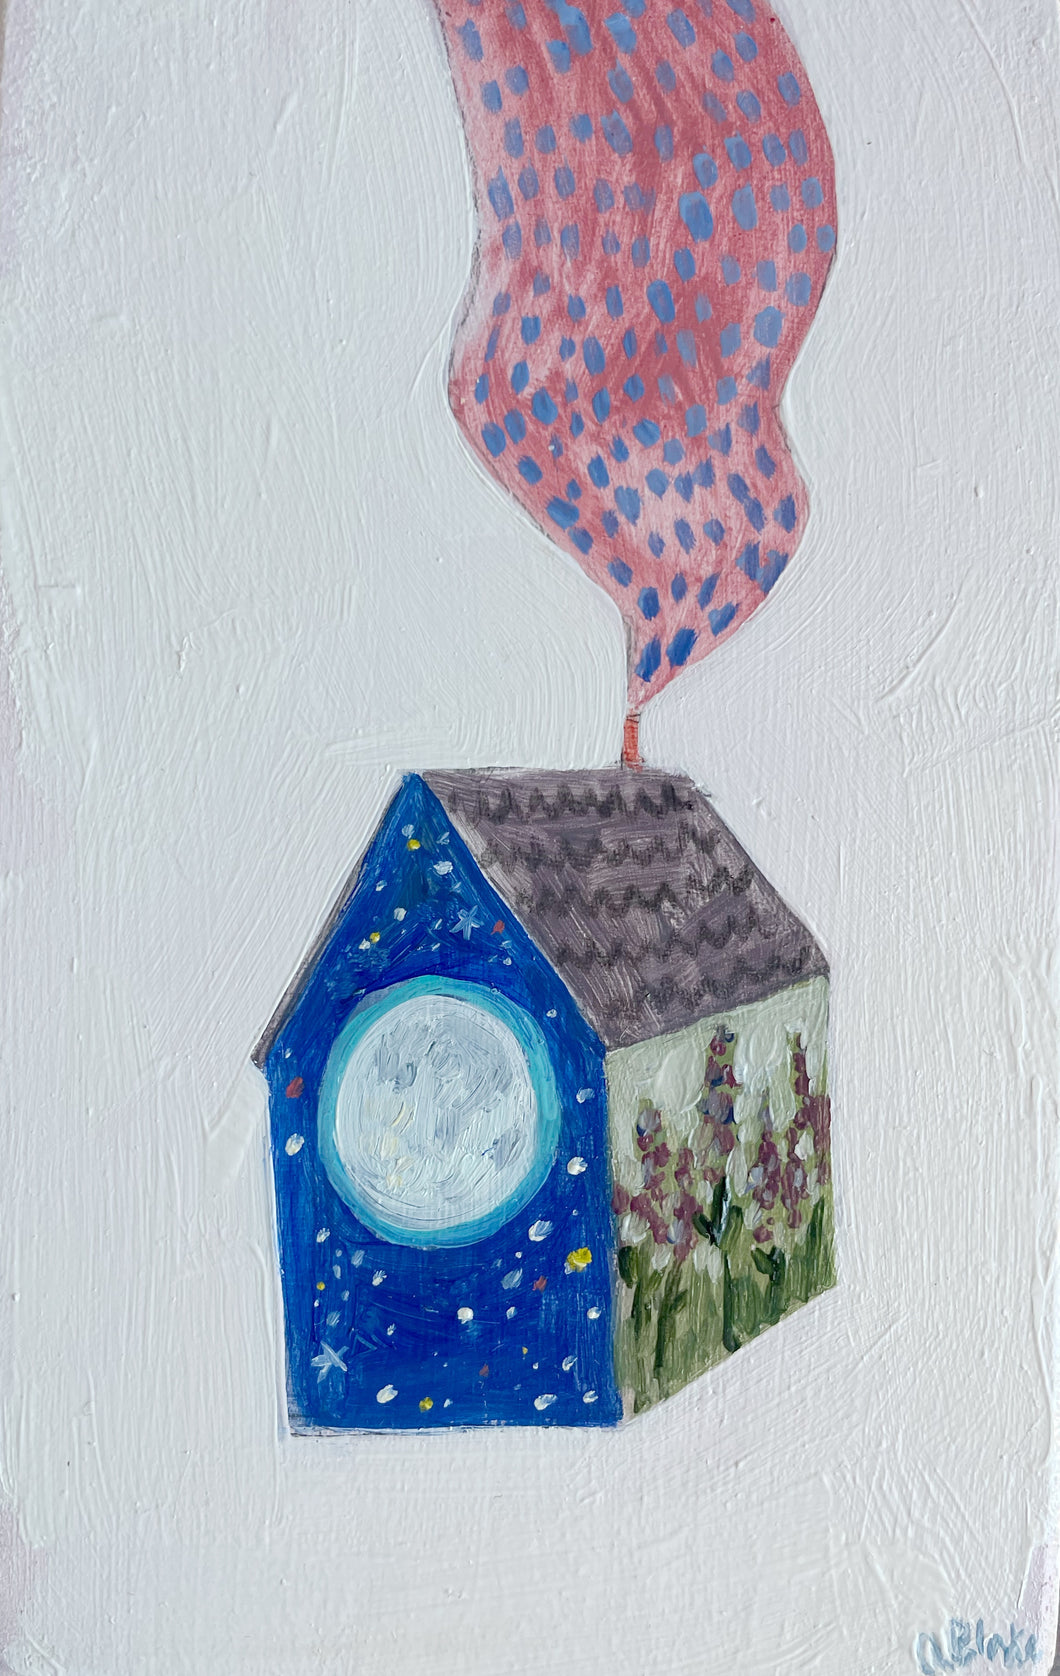 A home made of moonlight and lavender